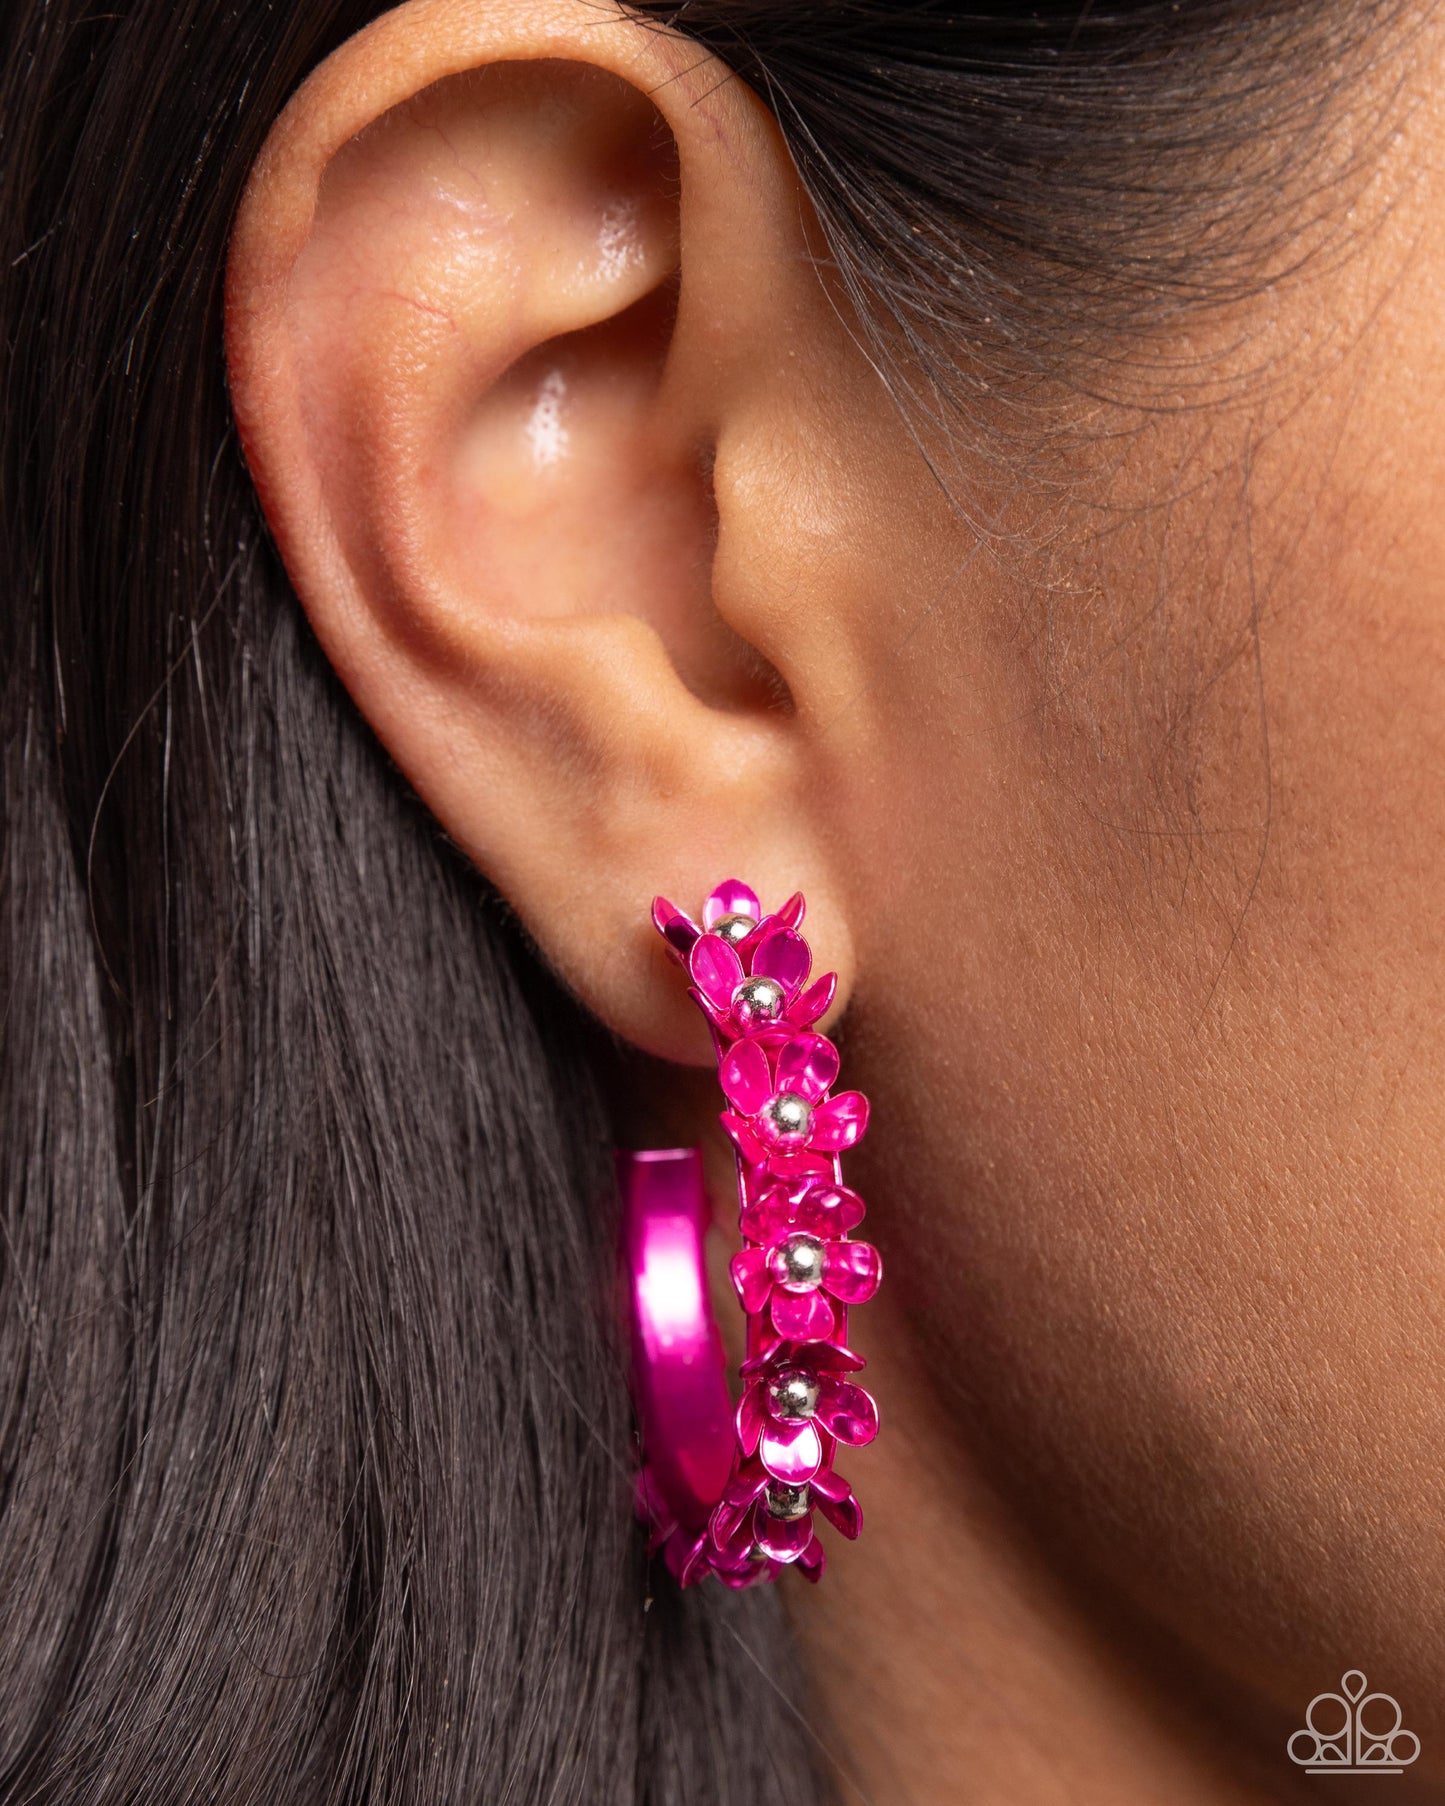 Dipped in a hot pink hue, a hollowed-out hoop curls around the ear. Featuring silver beaded centers, metallic hot pink flowers bloom along the curl of the hollow of the hoop for a fashionable display. Earring attaches to a standard post fitting. Hoop measures approximately 1 1/4" in diameter.